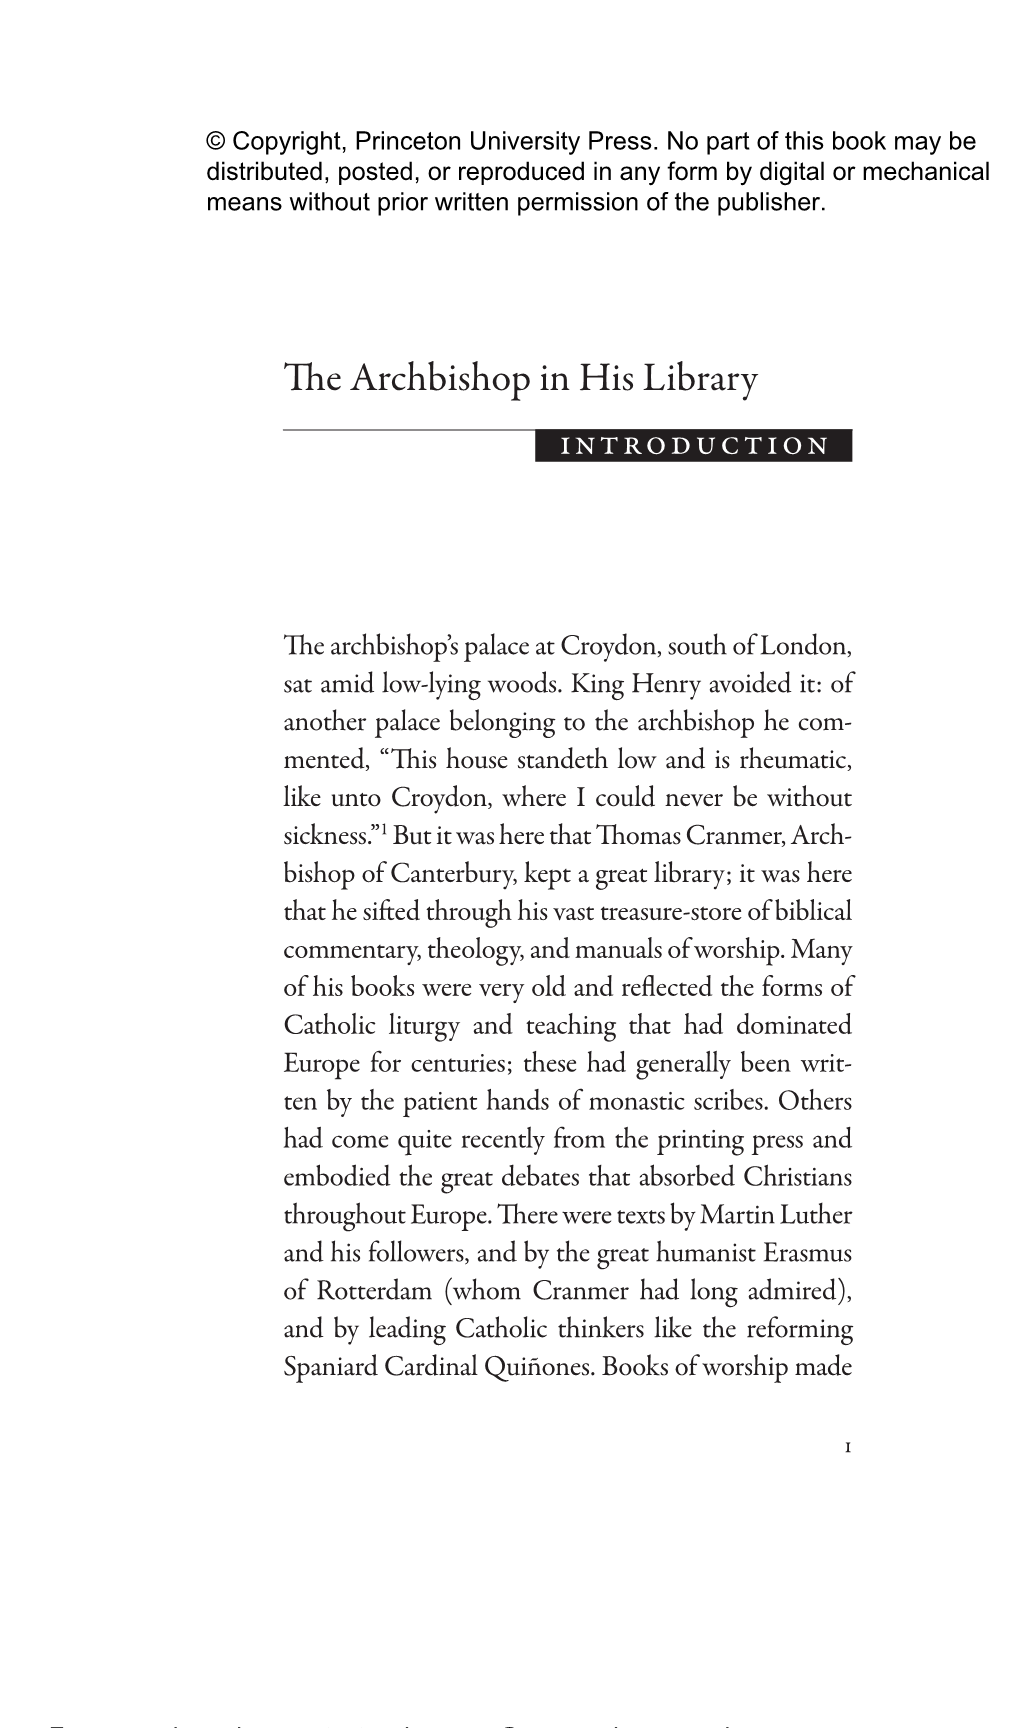 The Archbishop in His Library Introduction